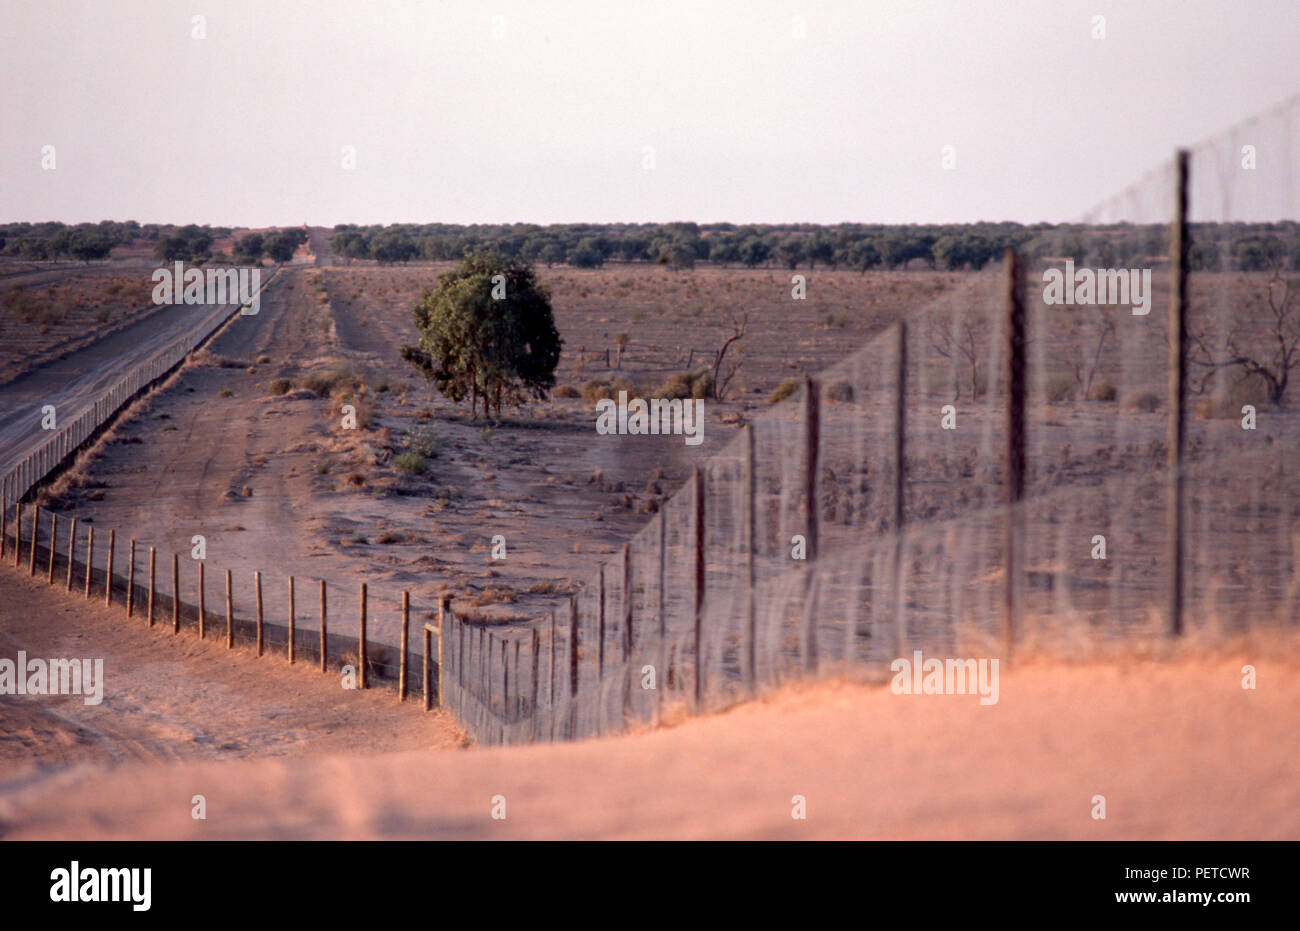 View along a section of the famous Dingo Fence or Dog Fence built in Australia during the 1880's and finished in 1885 to keep dingoes out of farmland. Stock Photo